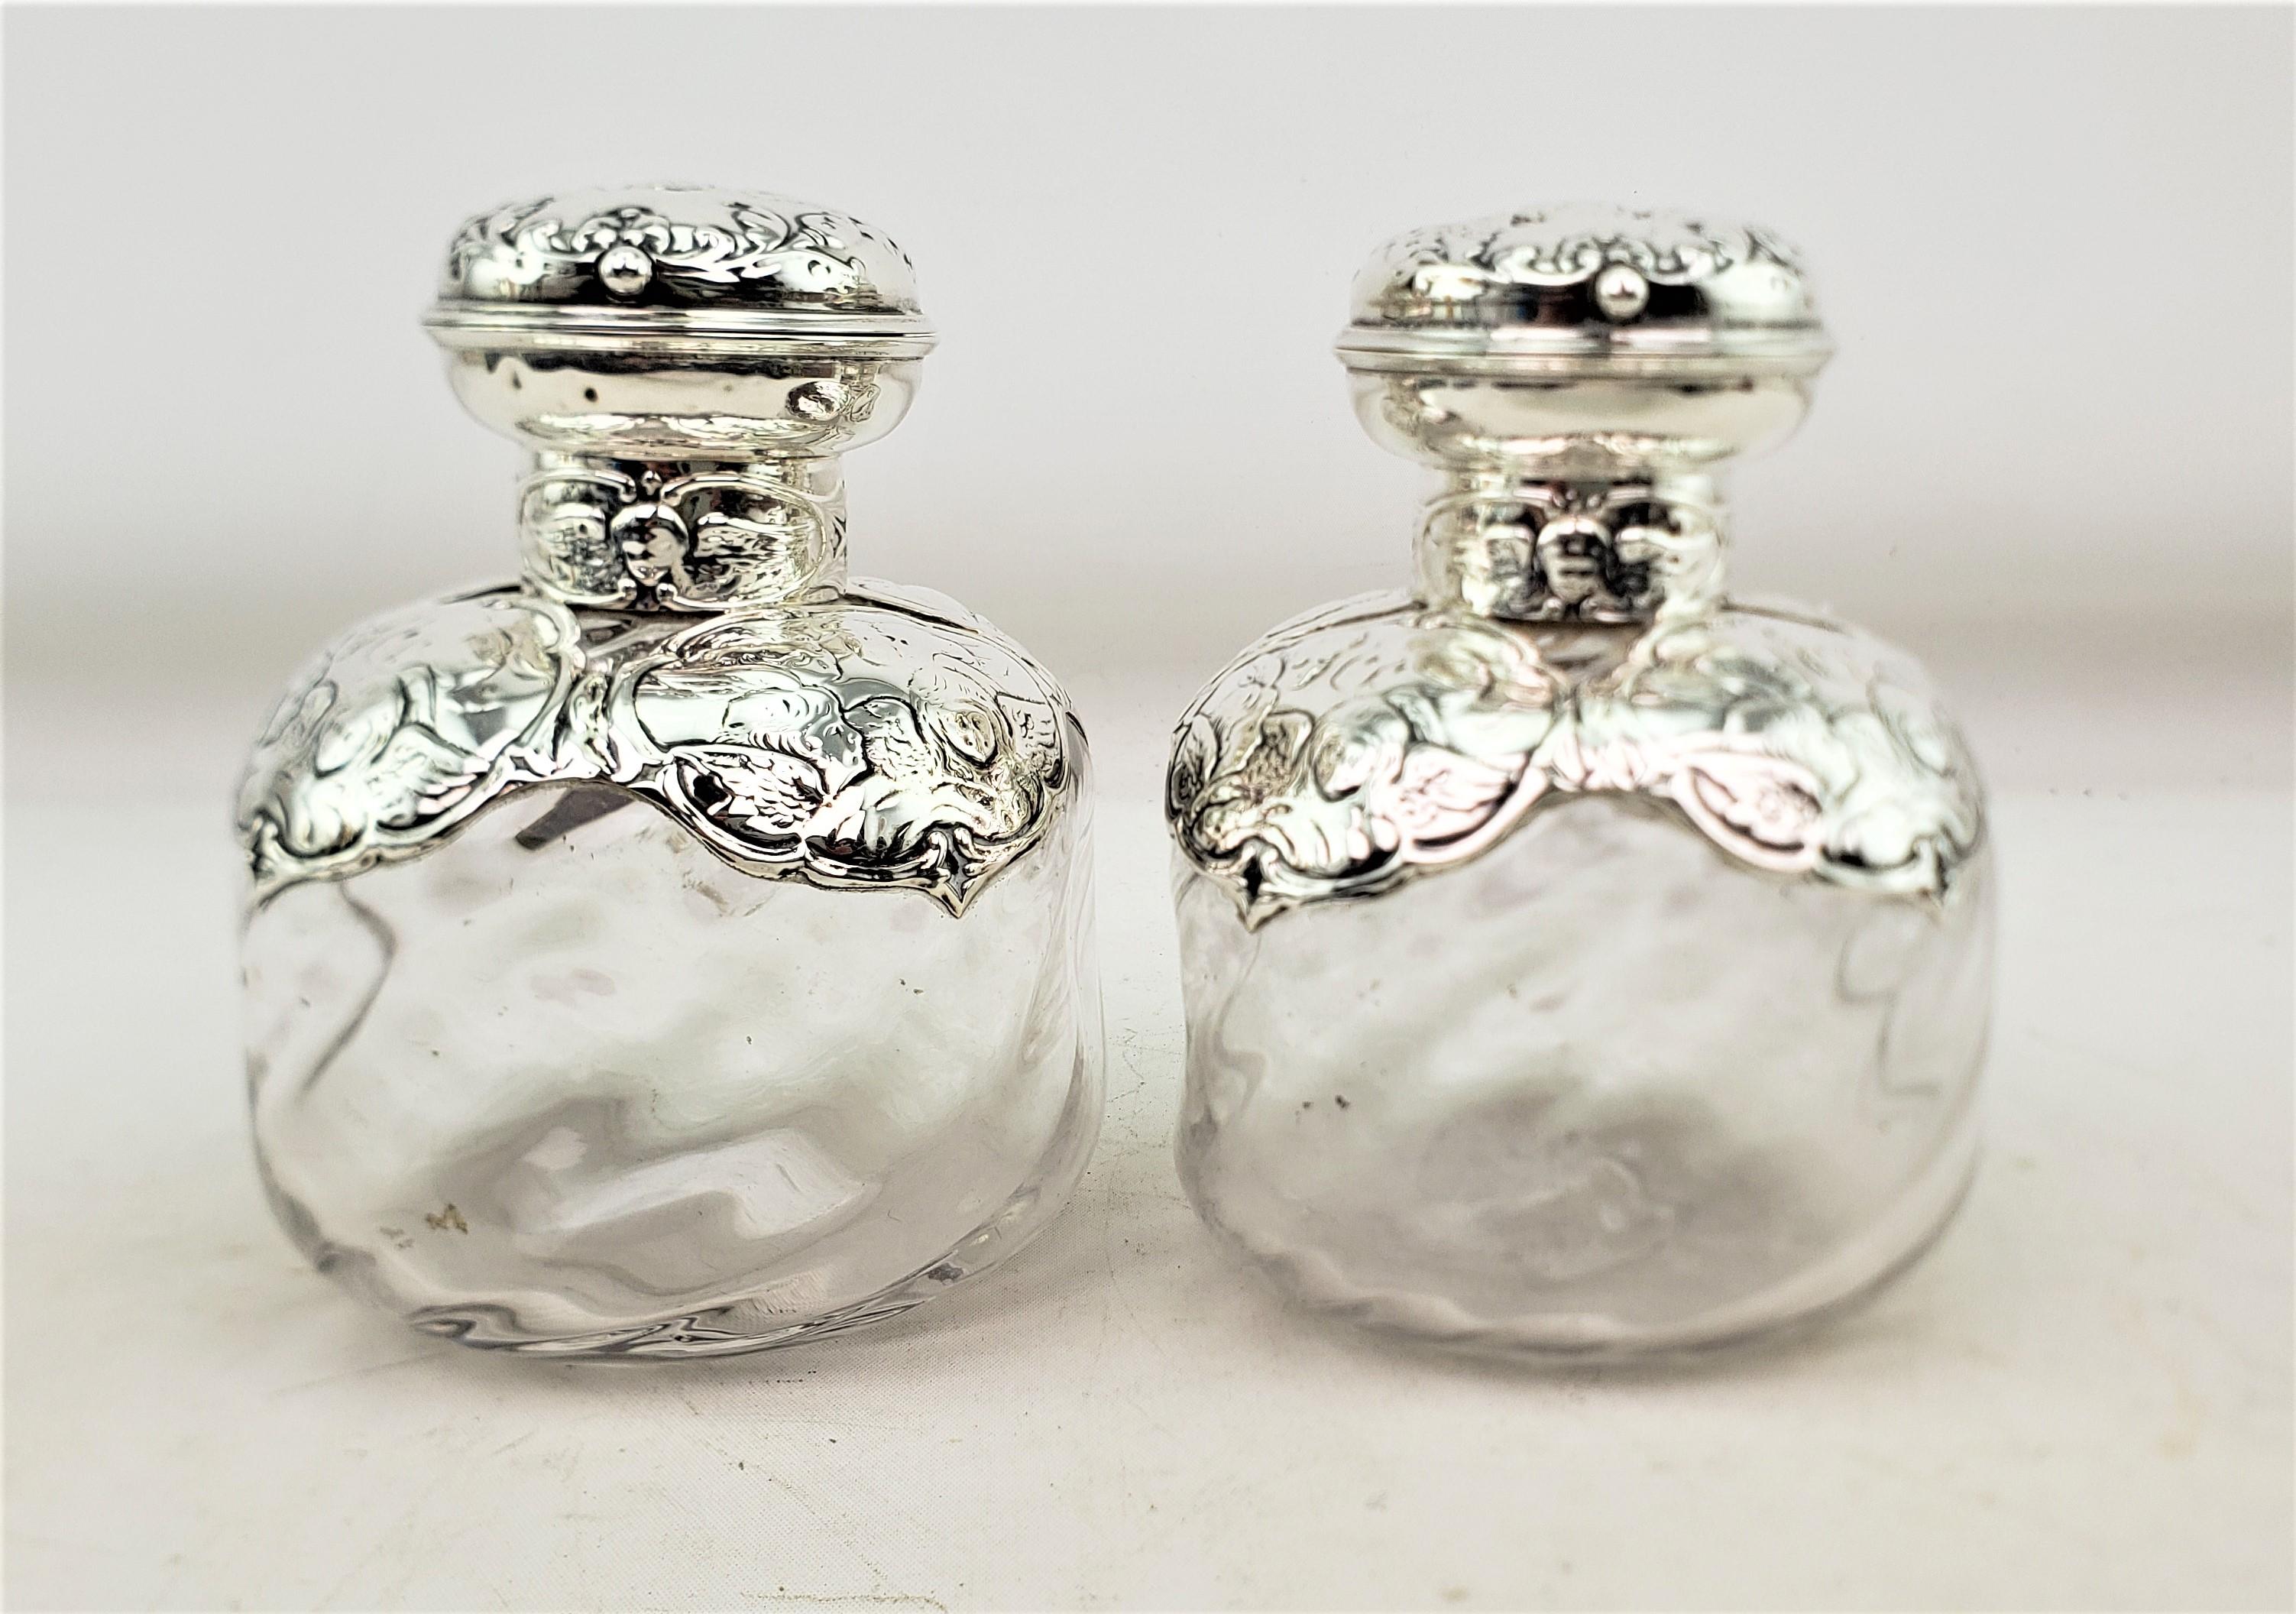 This large pair of antique perfume bottles was made by the well known silversmiths William Comyns & Sons Ltd. of England and date to approximately 1880 and done in the period Victorian style. The bottles are composed of clear glass with squared